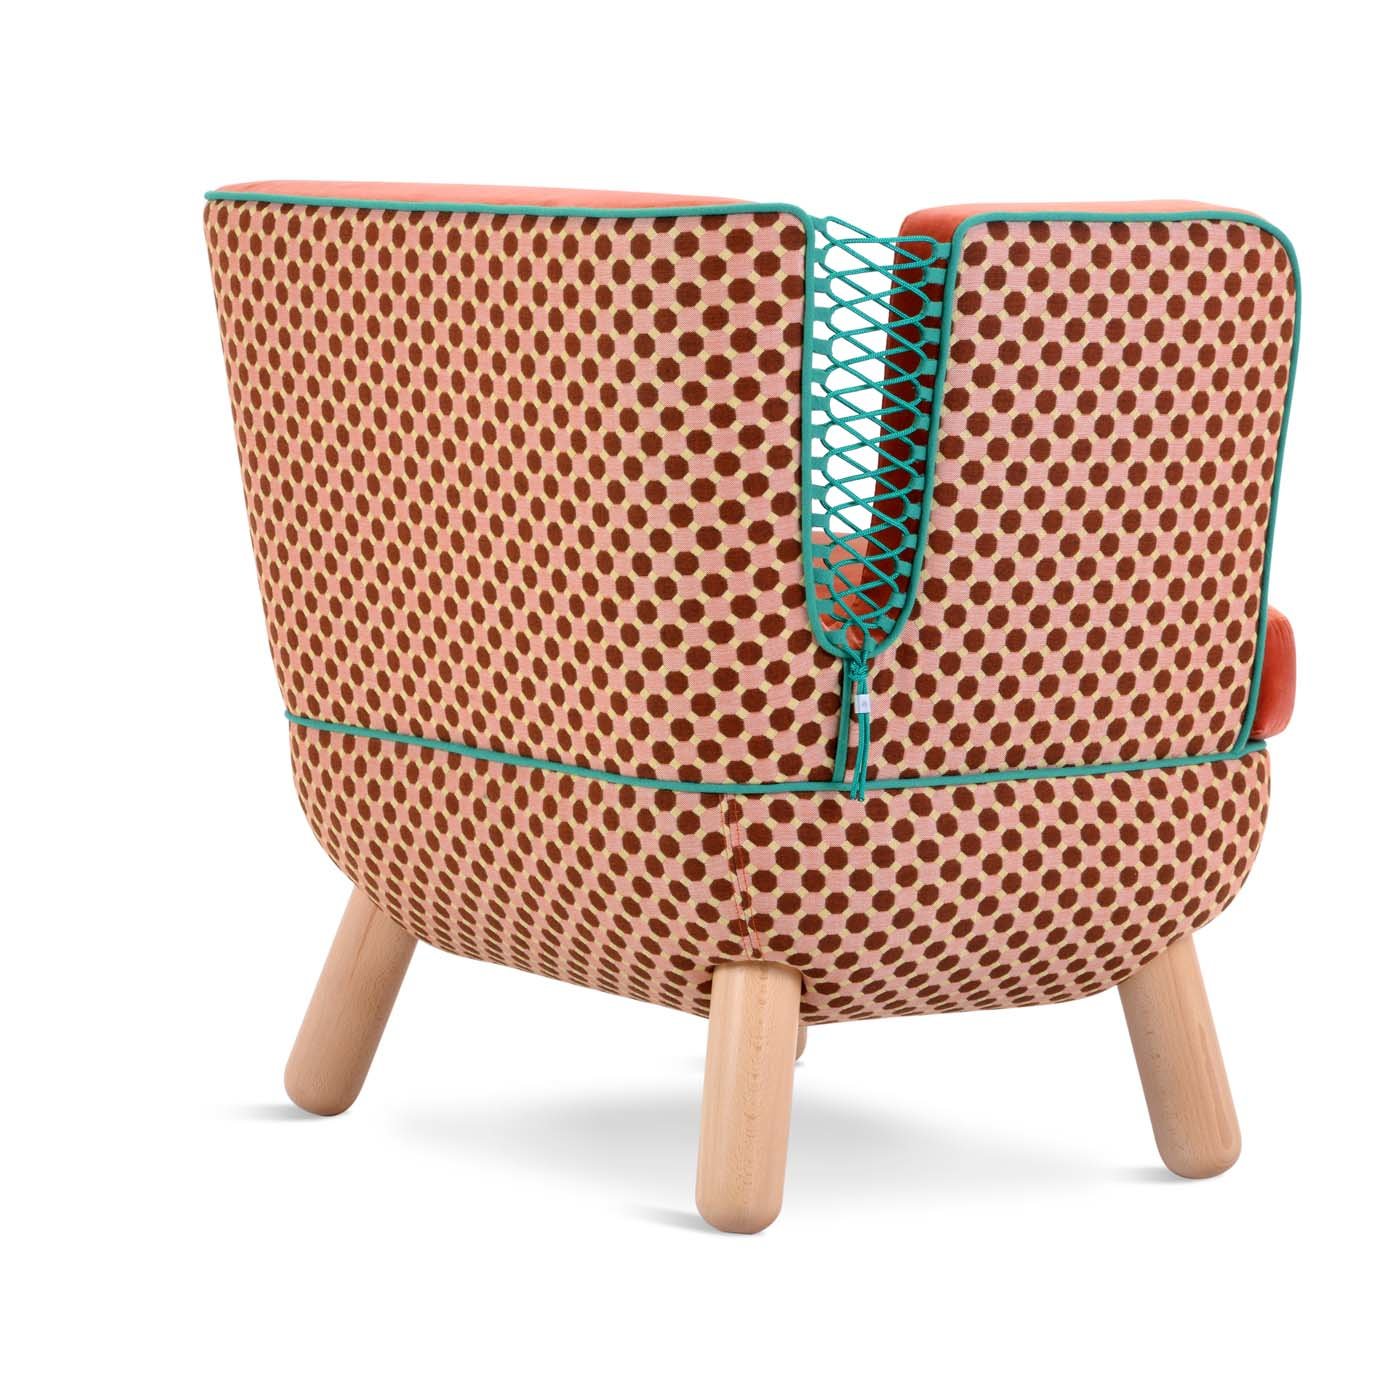 Sly Low Armchair with Ropes By Italo Pertichini rombi - Alternative view 3